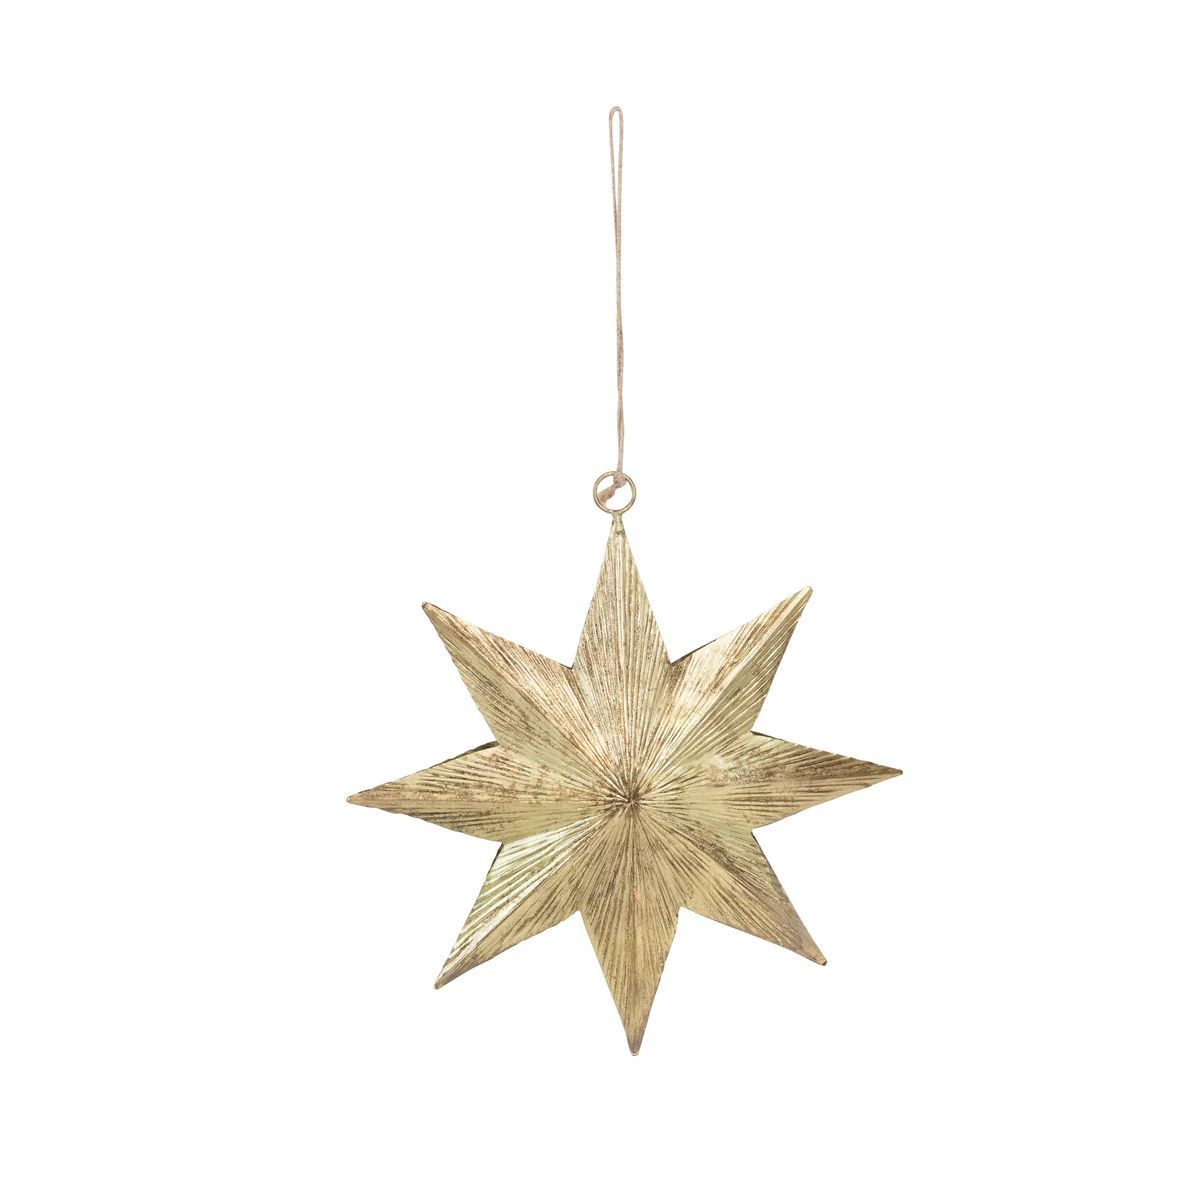 STAR ORNAMENT - LARGE | Cooper at Home